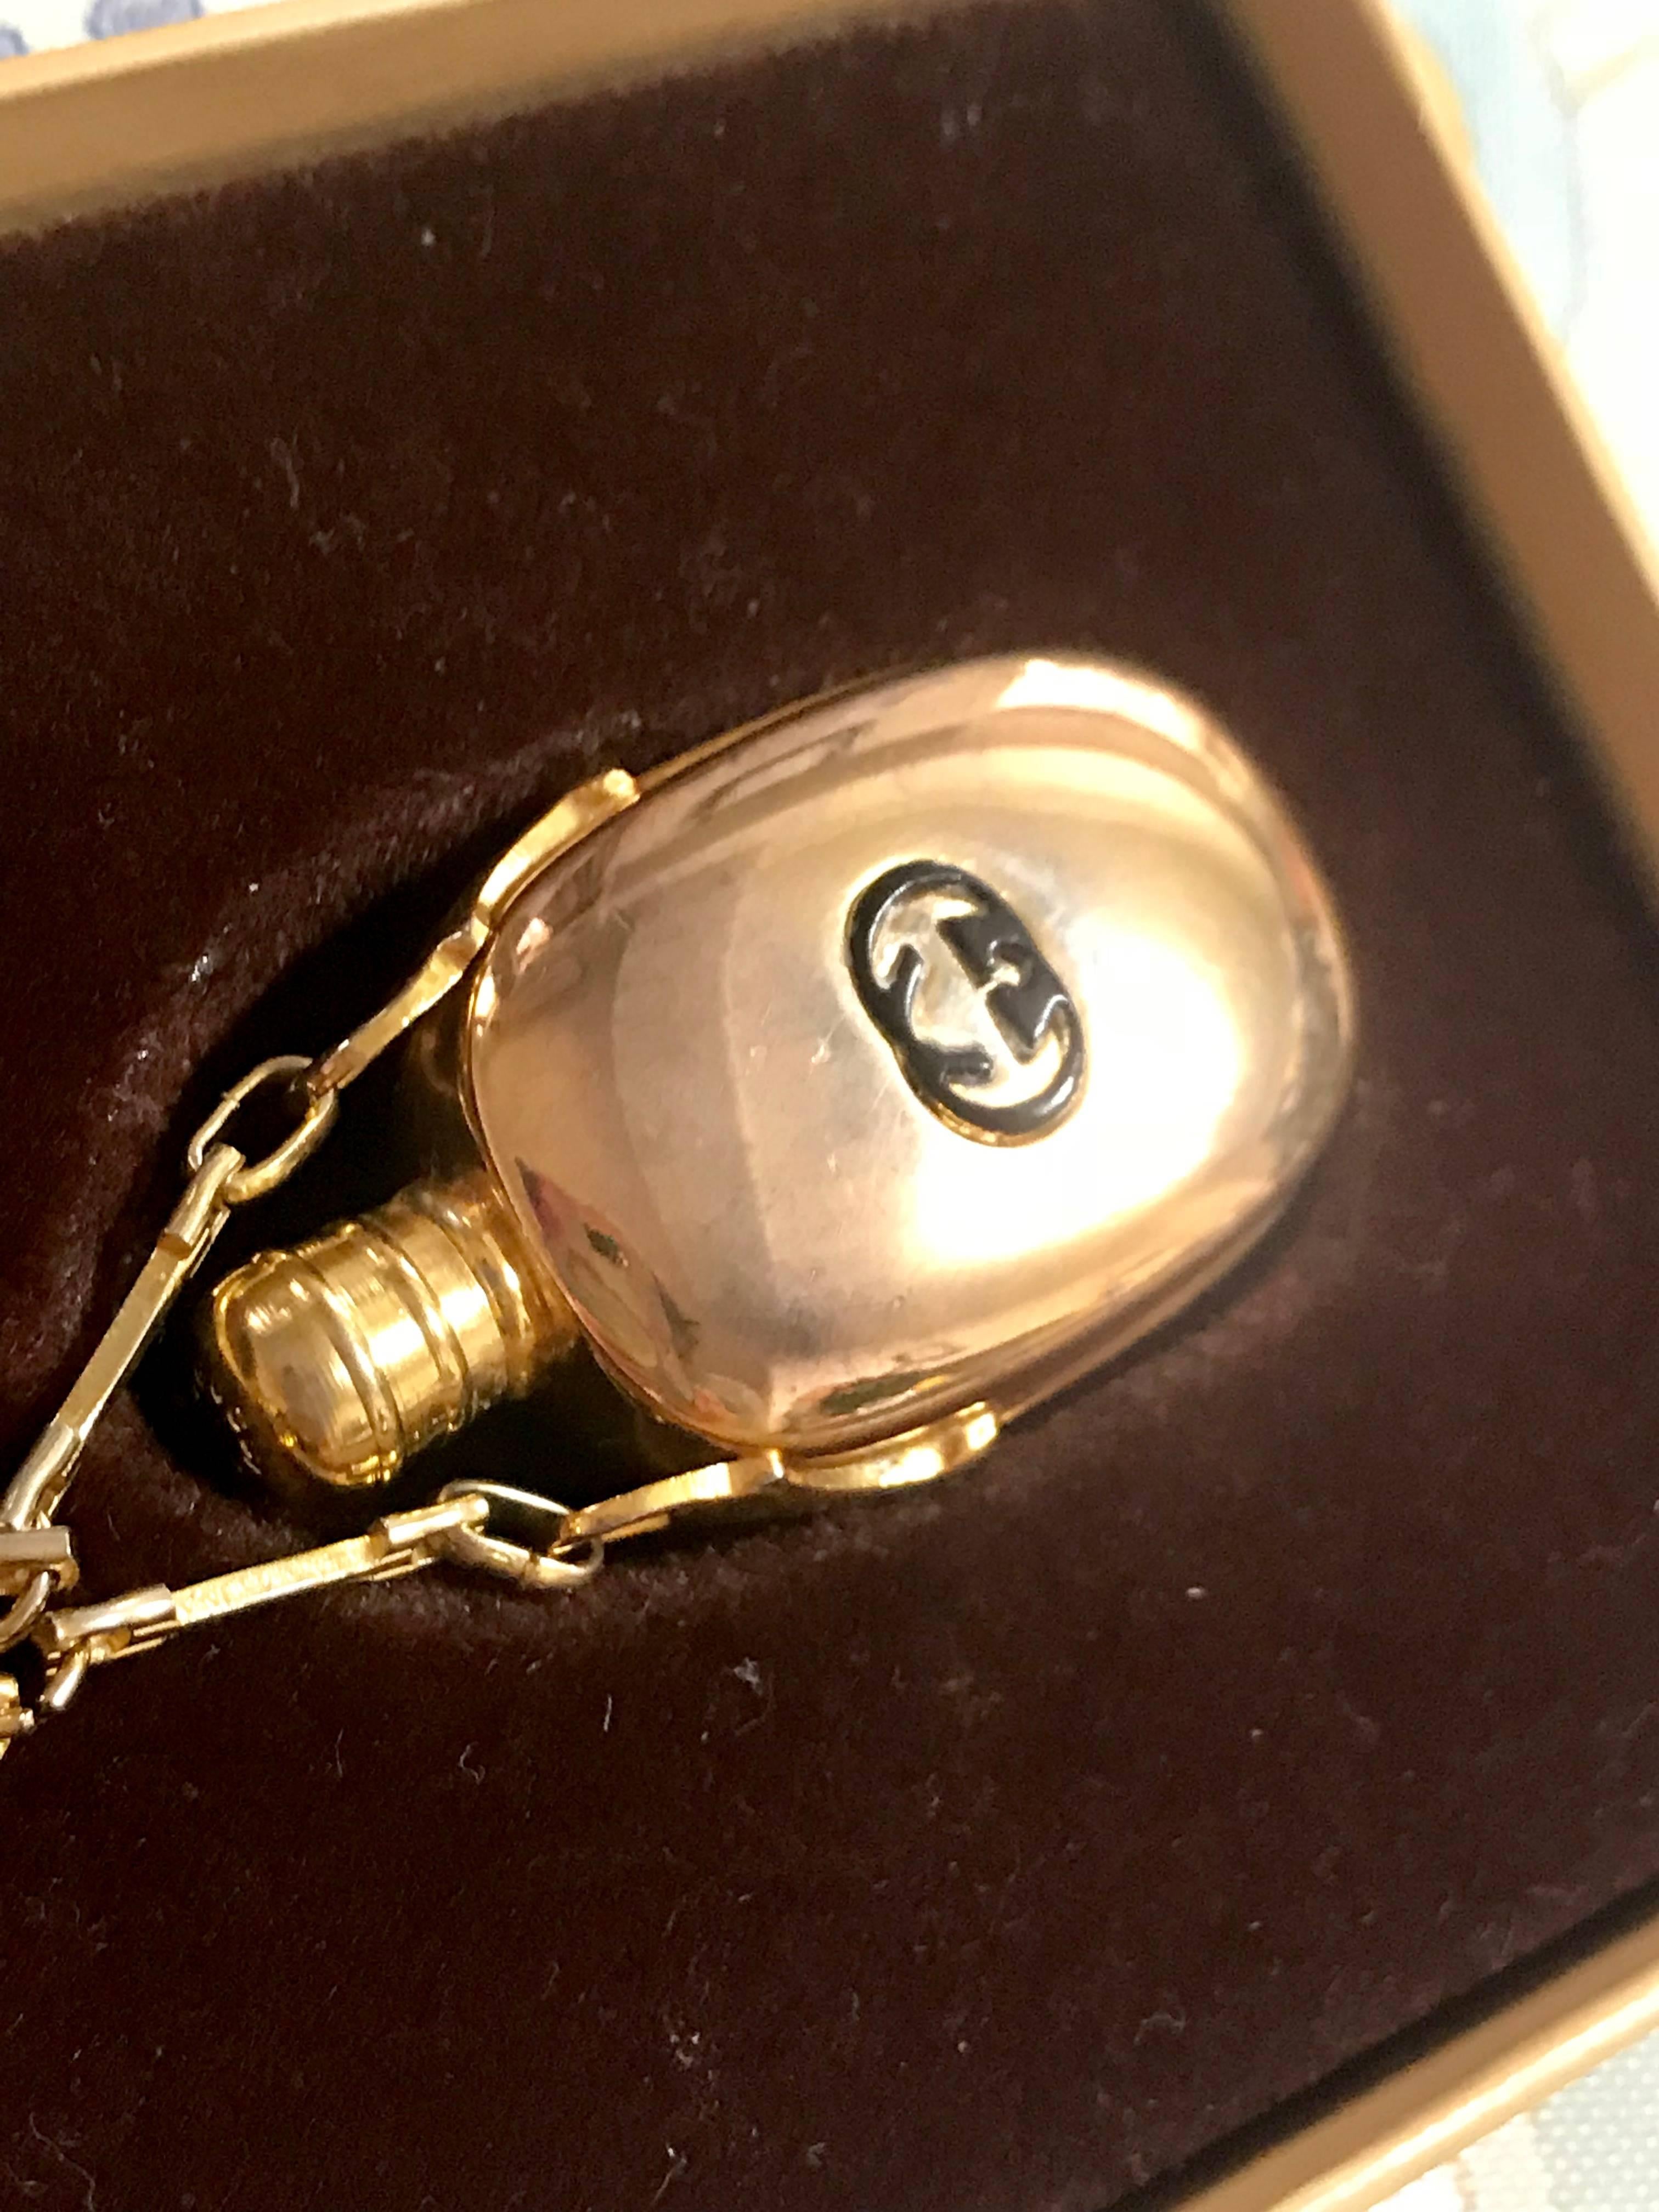 1980s. Vintage Gucci golden perfume bottle necklace with logo mark on top. Gorgeous rare masterpiece from 80's.

Introducing a rare vintage perfume bottle necklace with the iconic mark at front from Gucci in the 80's.
Would be a perfect vintage